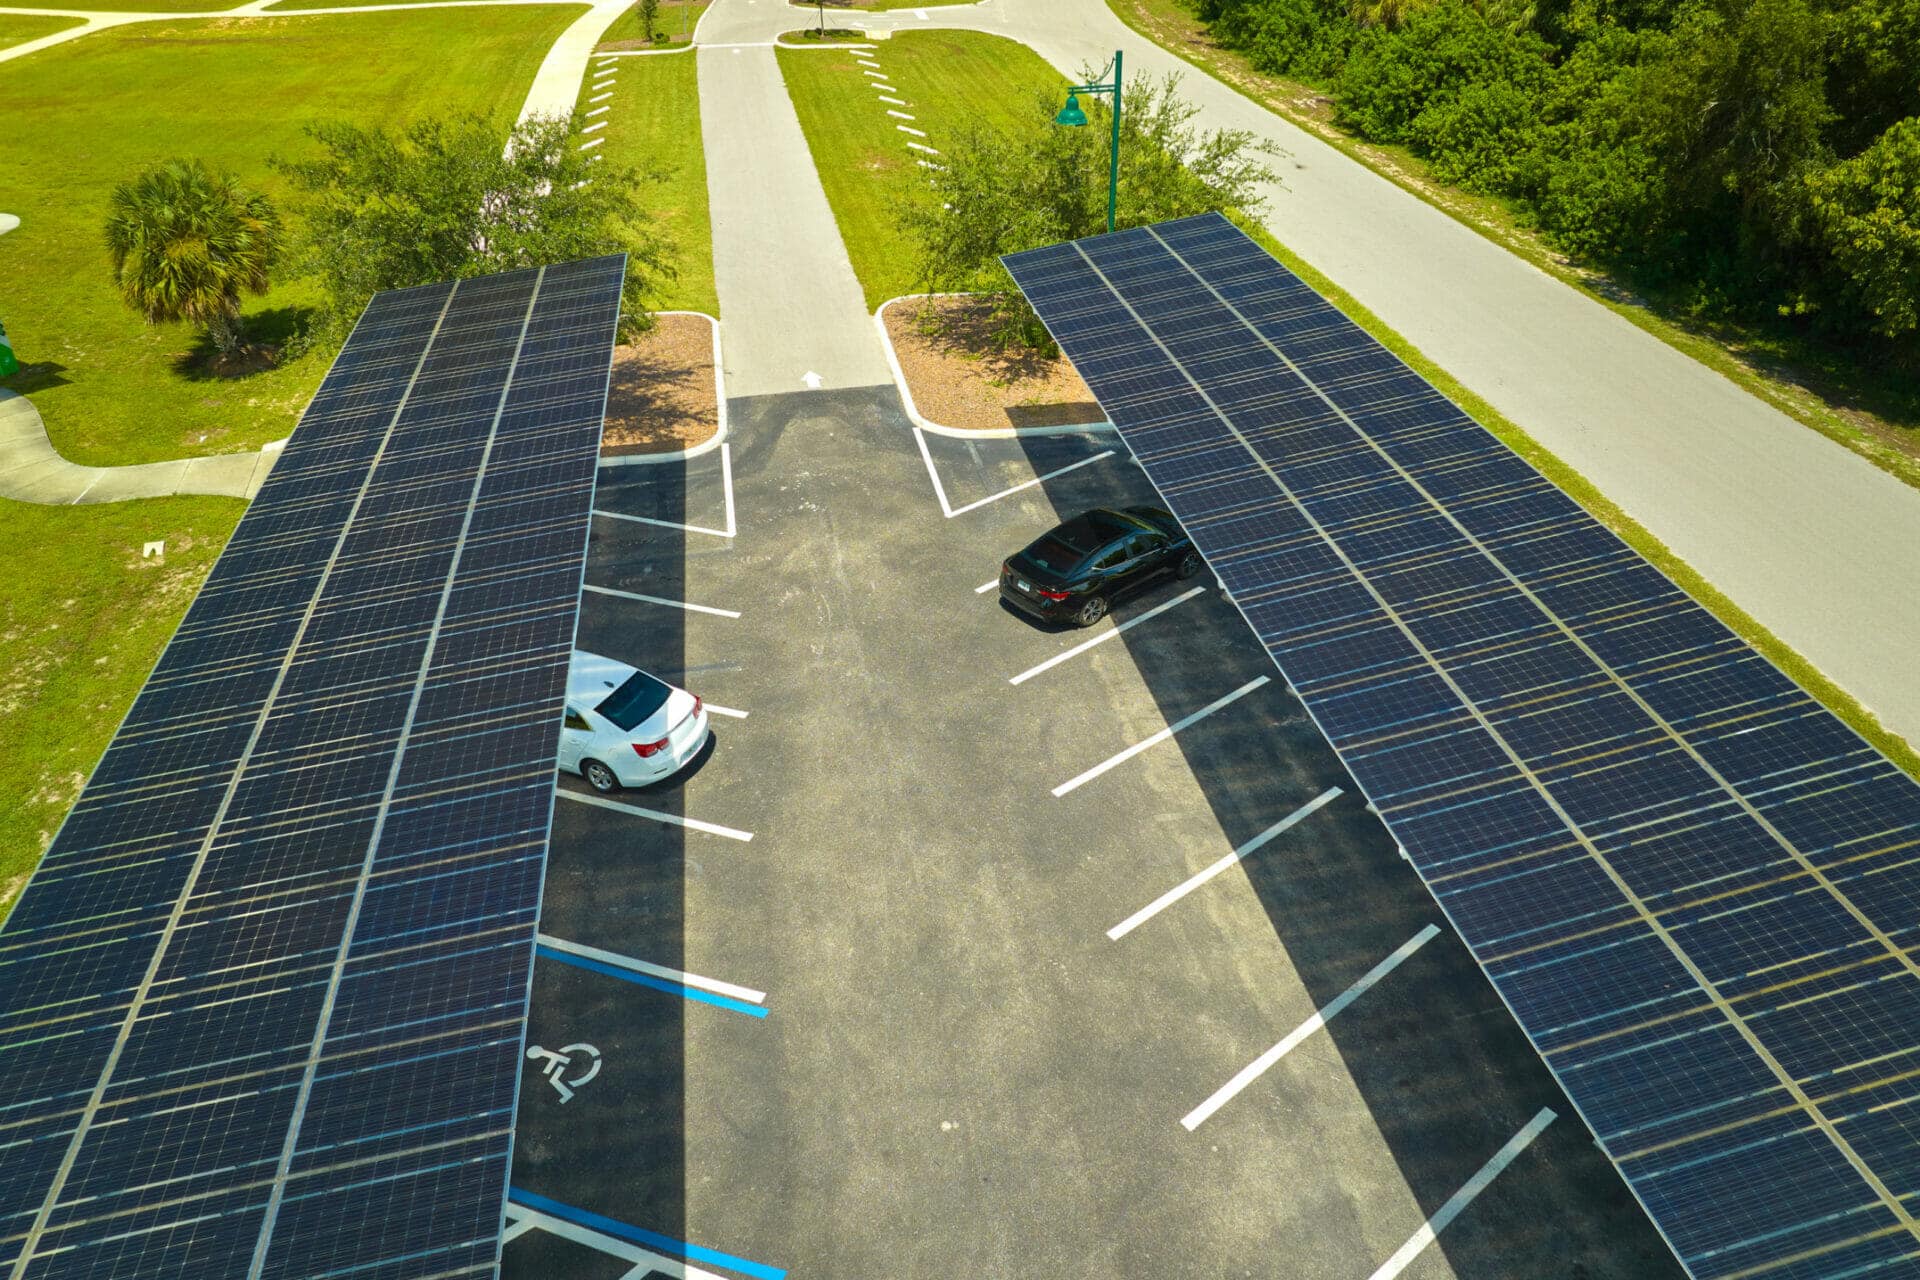 Parking Lot with Solar